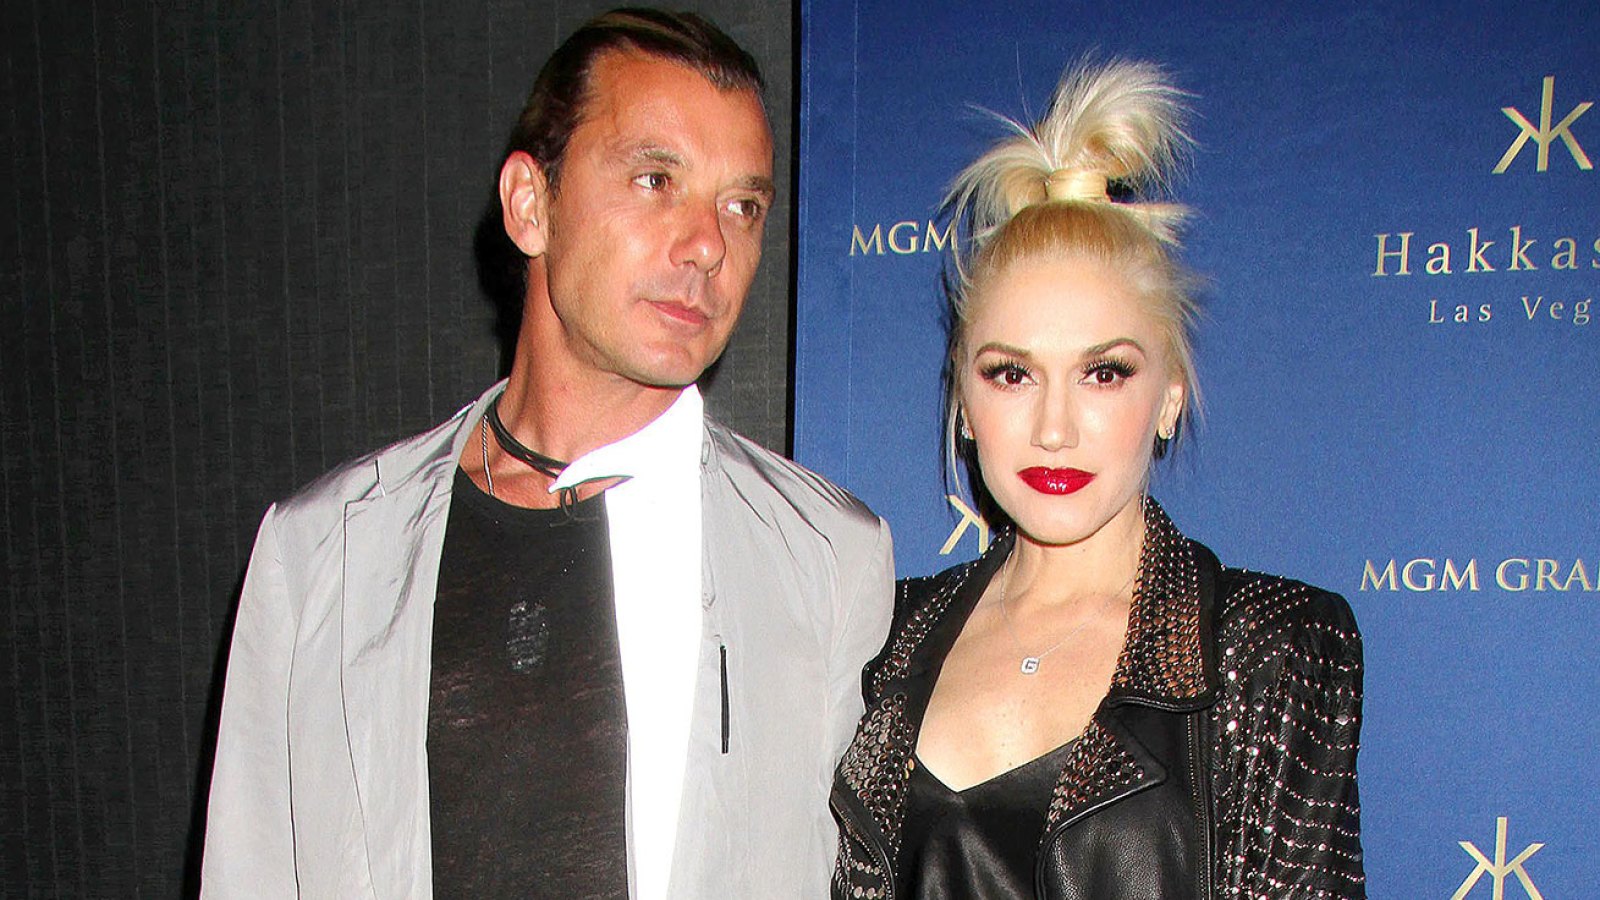 Gavin Rossdale Cheated on Gwen Stefani With the Family Nanny for Years “Right Under” Her Nose: Details